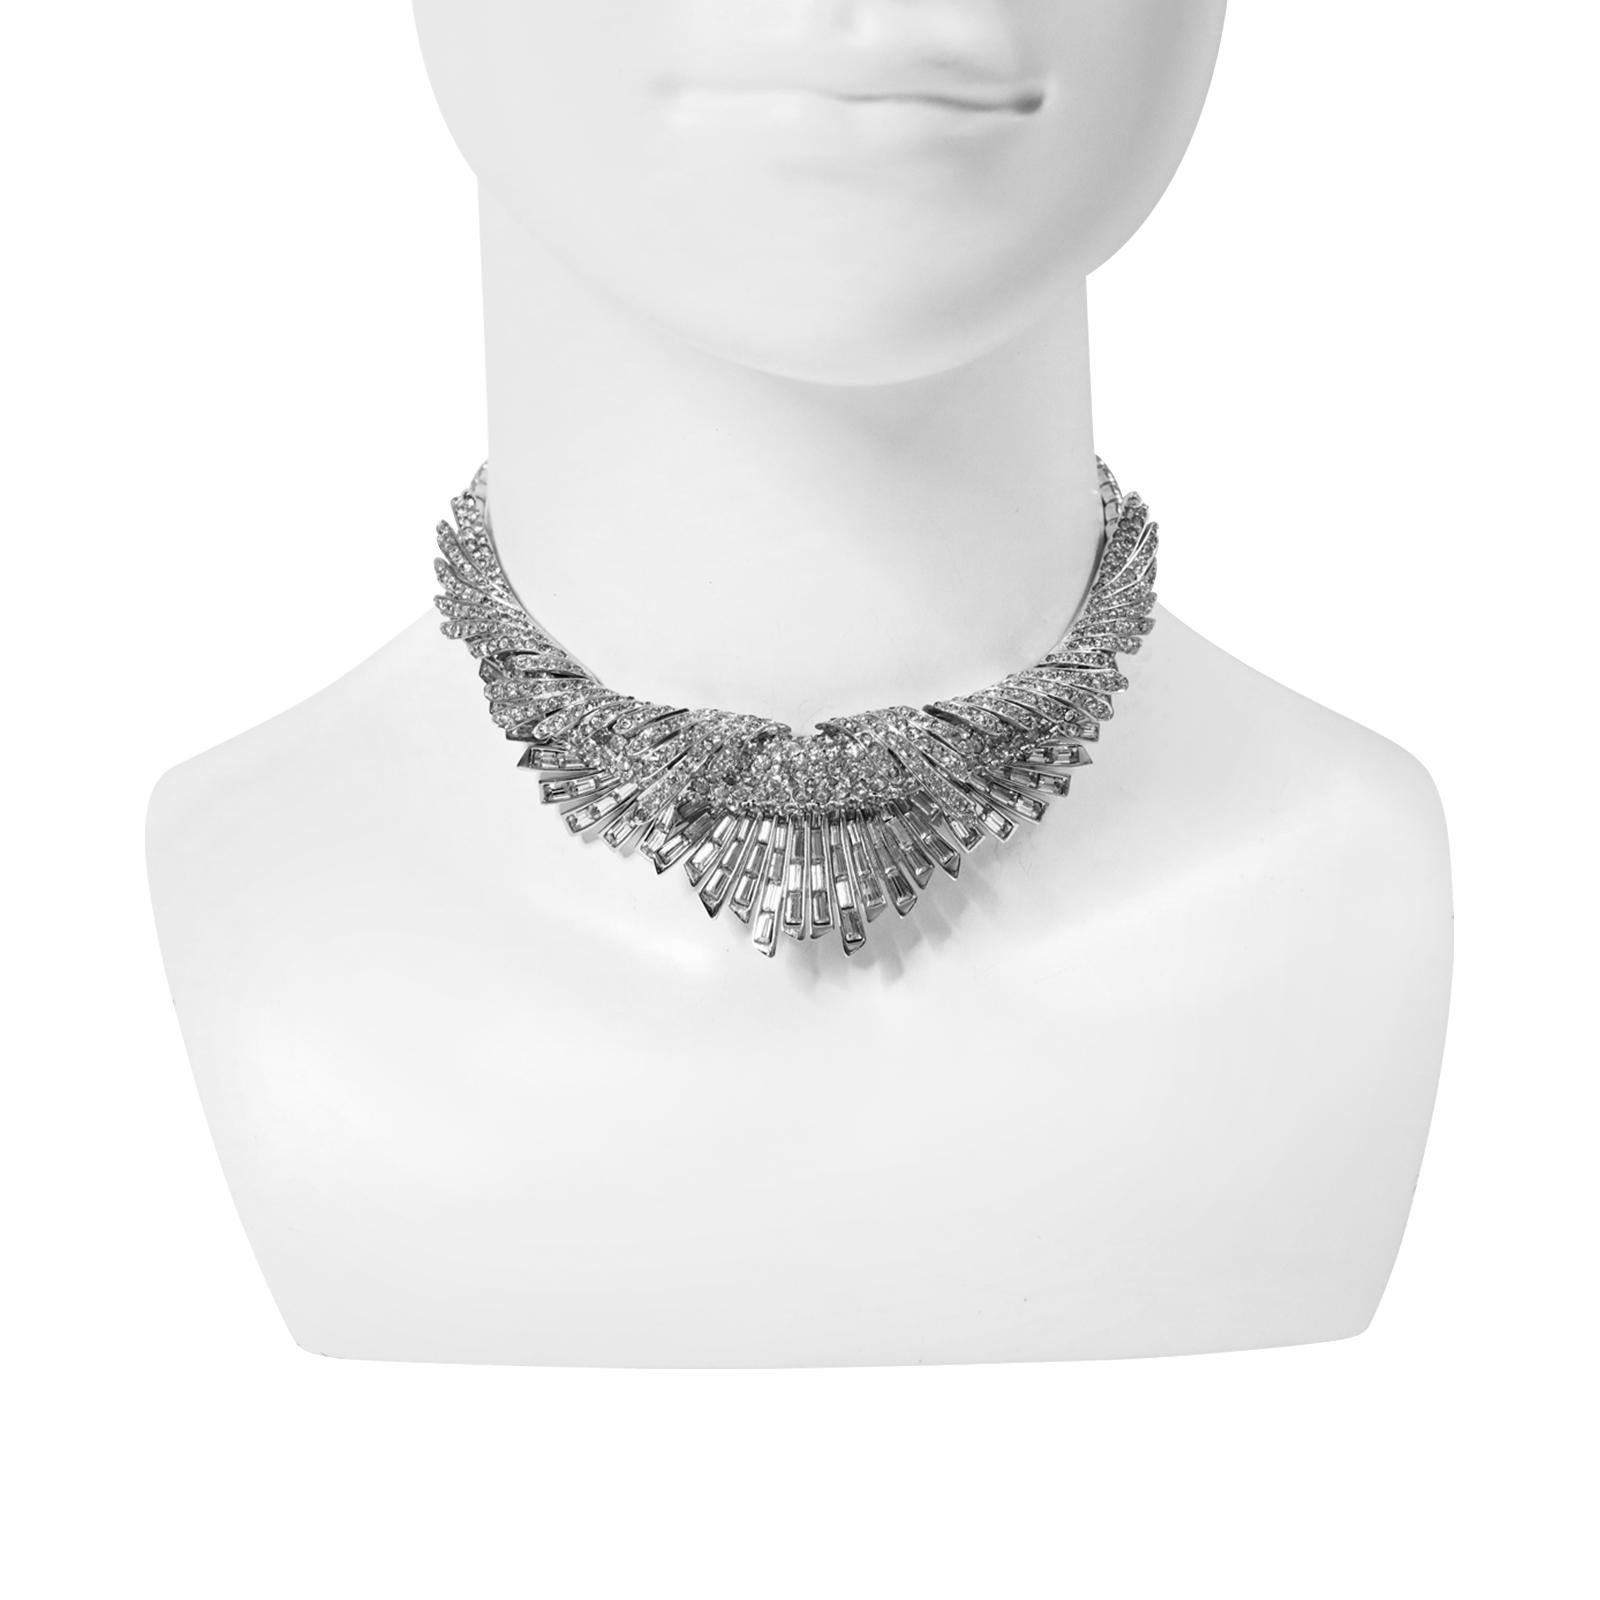 Vintage Boucher Pave and Baguette Layered Necklace Circa 1960s.  This is the most beautiful necklace I have ever had in the rhinestone/crystal family.  I had the sister necklace but a famous celebrity who shall remain nameless bought it. This is